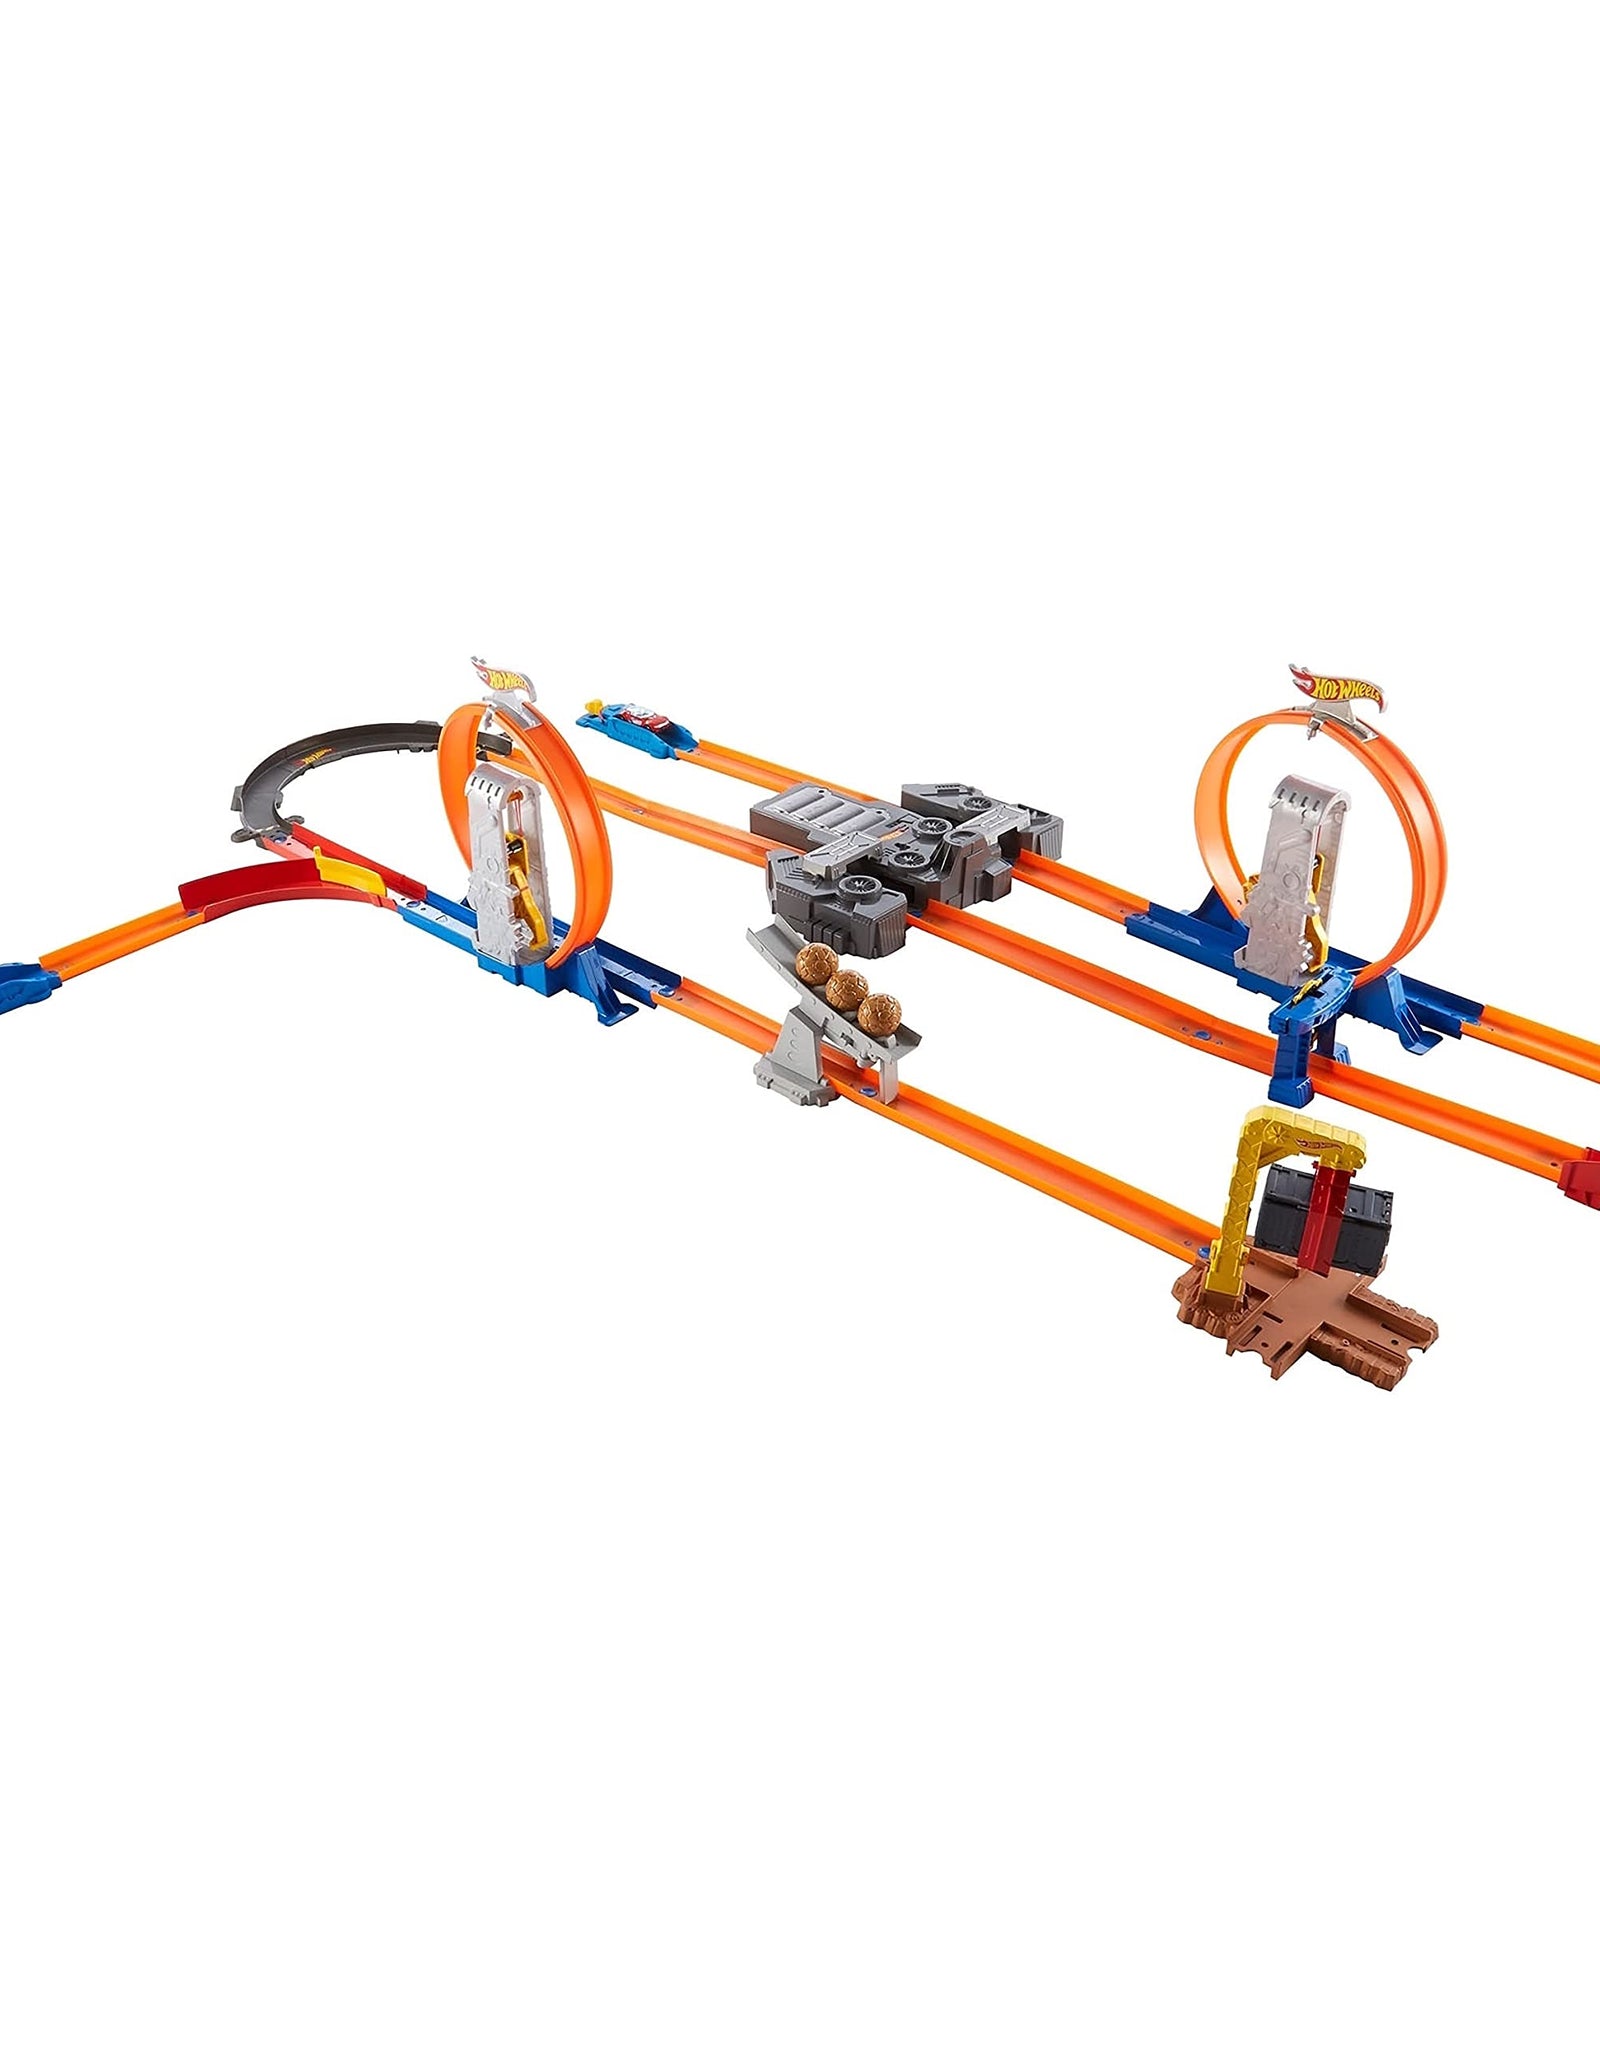 Hot Wheels Track Builder Total Turbo Takeover Track Set [Amazon Exclusive]